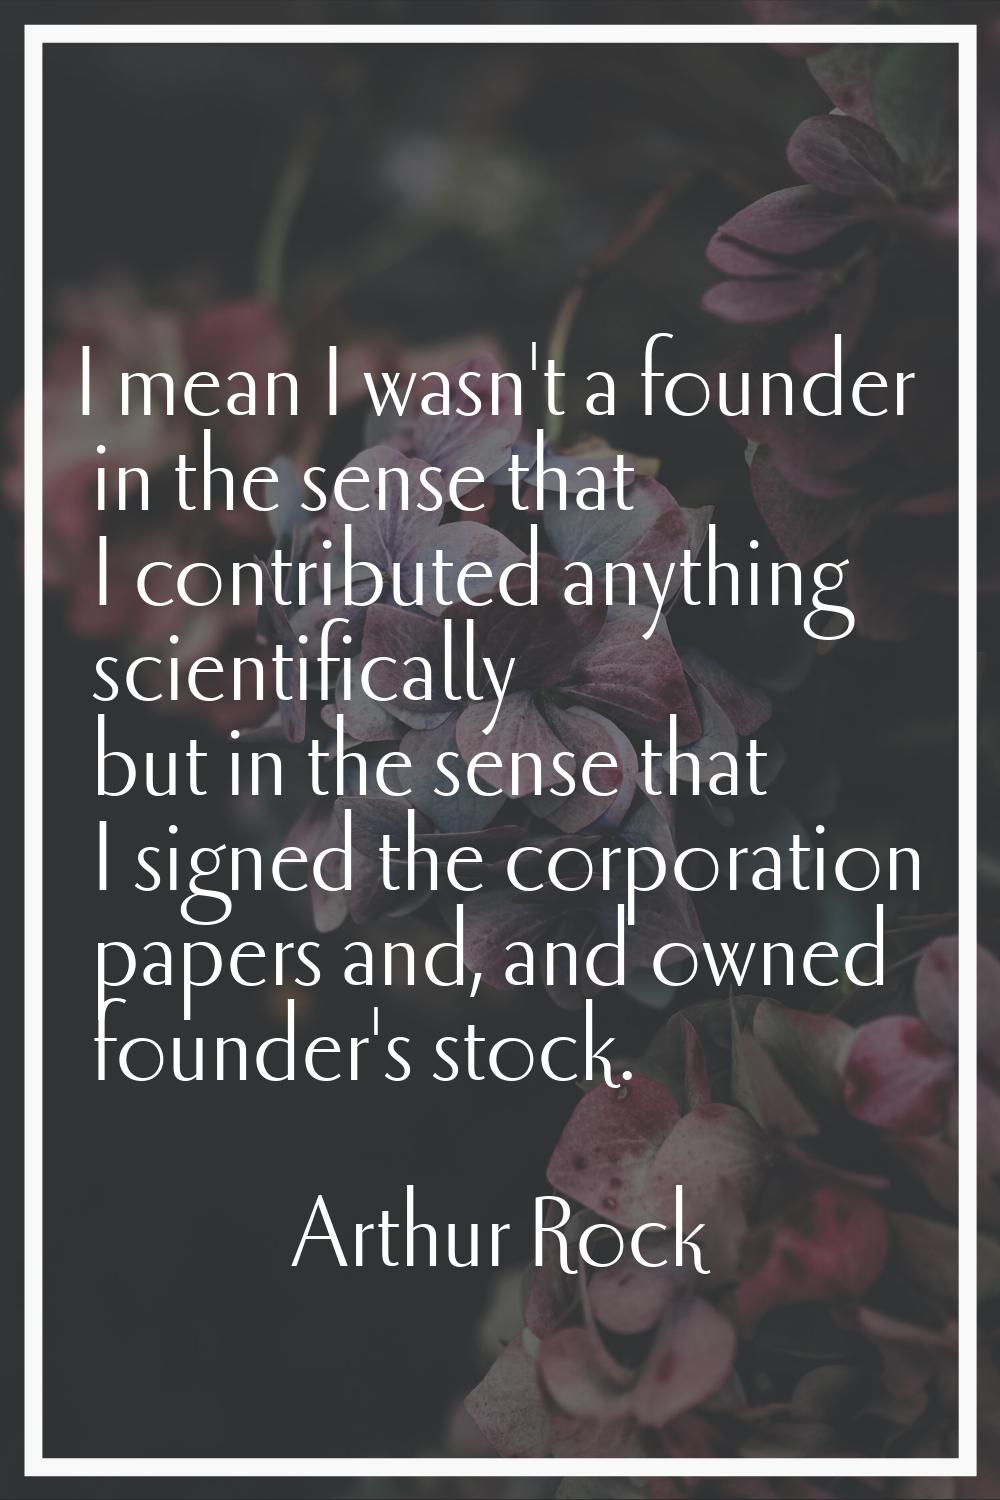 I mean I wasn't a founder in the sense that I contributed anything scientifically but in the sense 